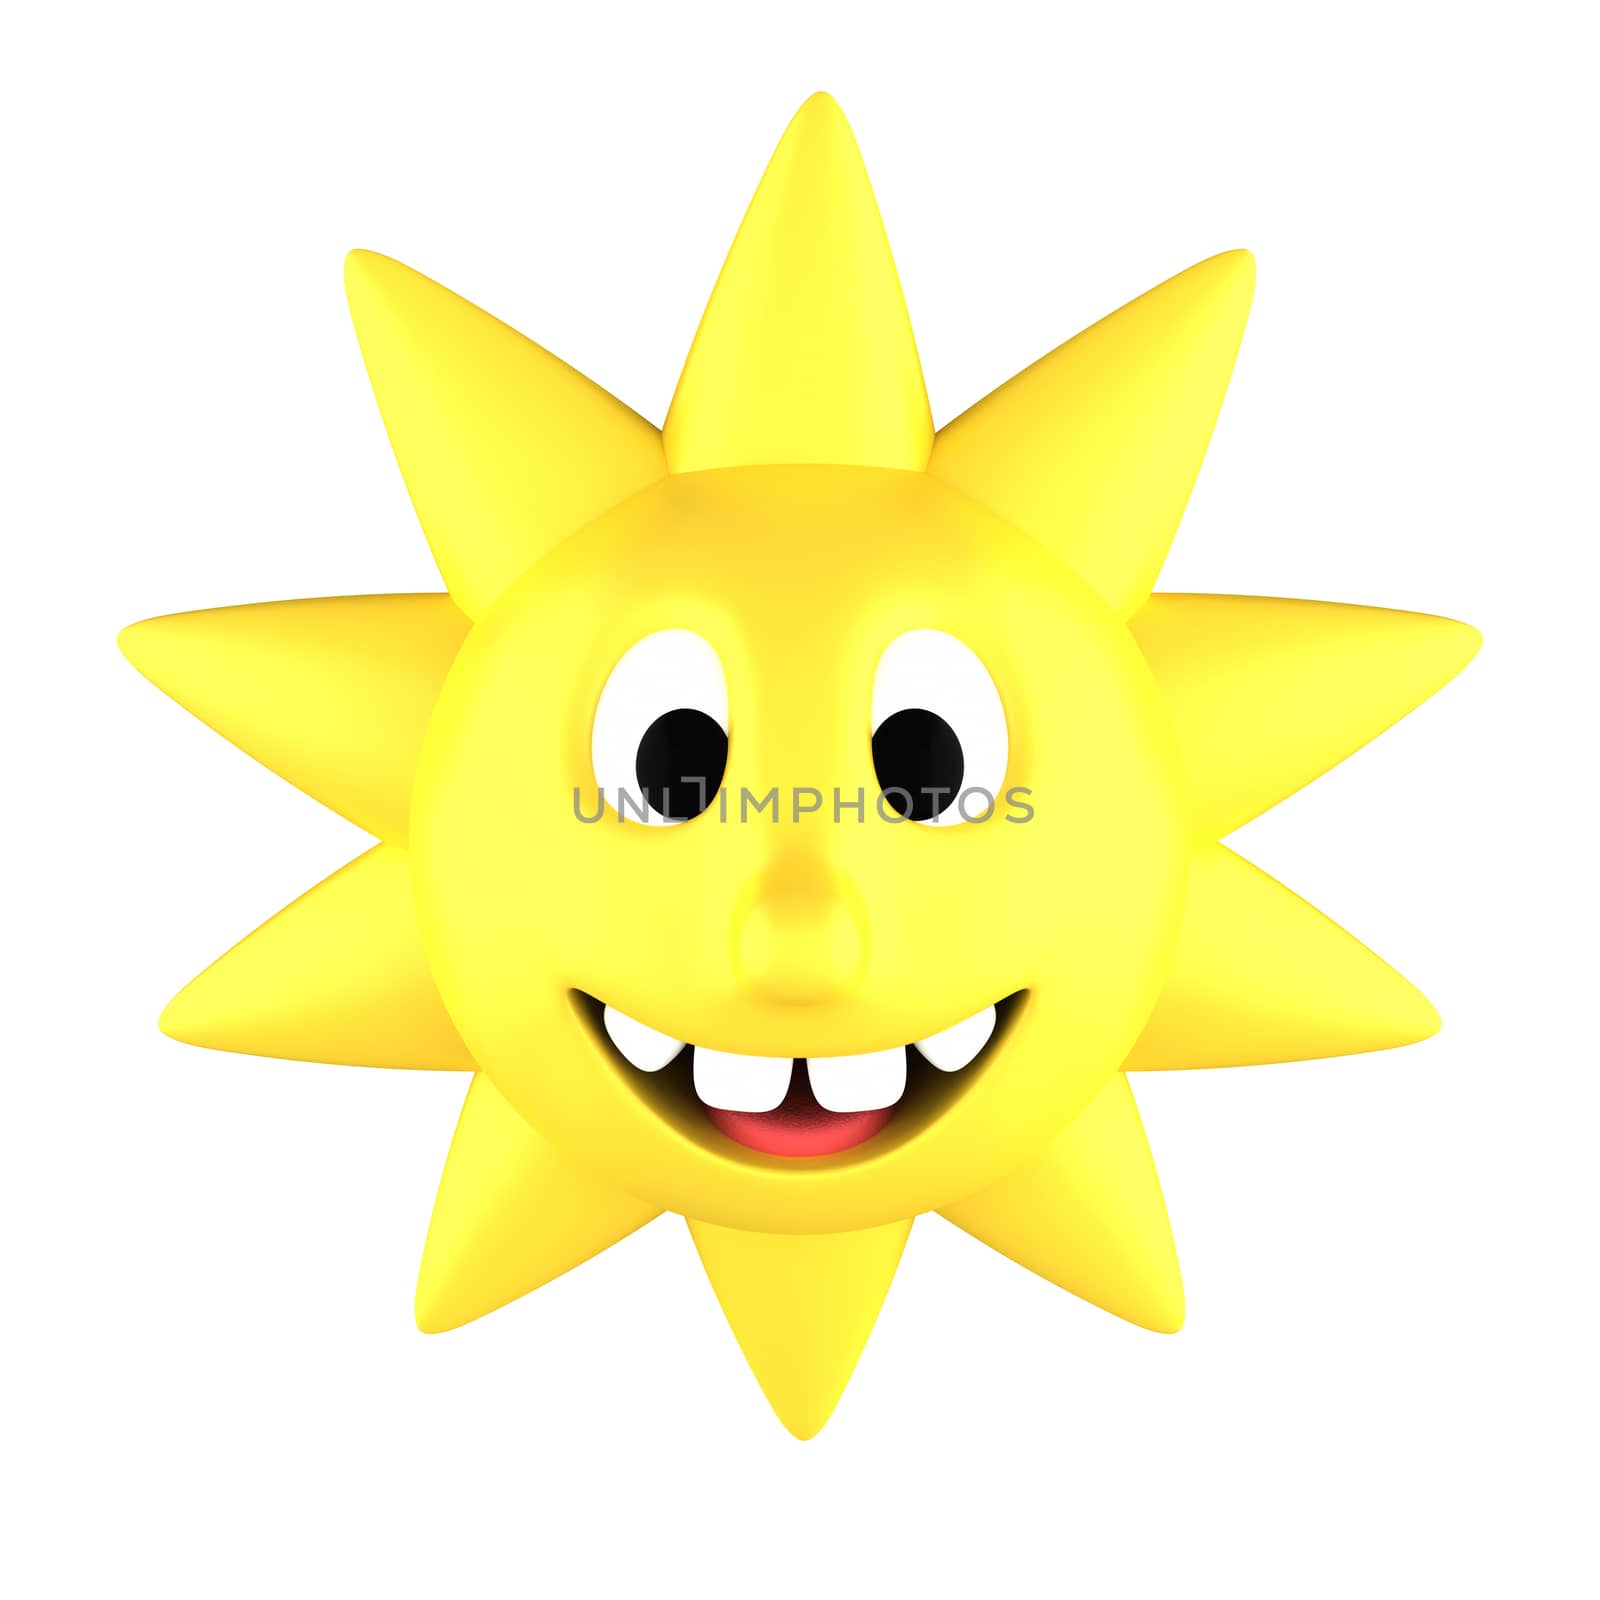 Yellow sun smiling showing teeth, isolated on white background